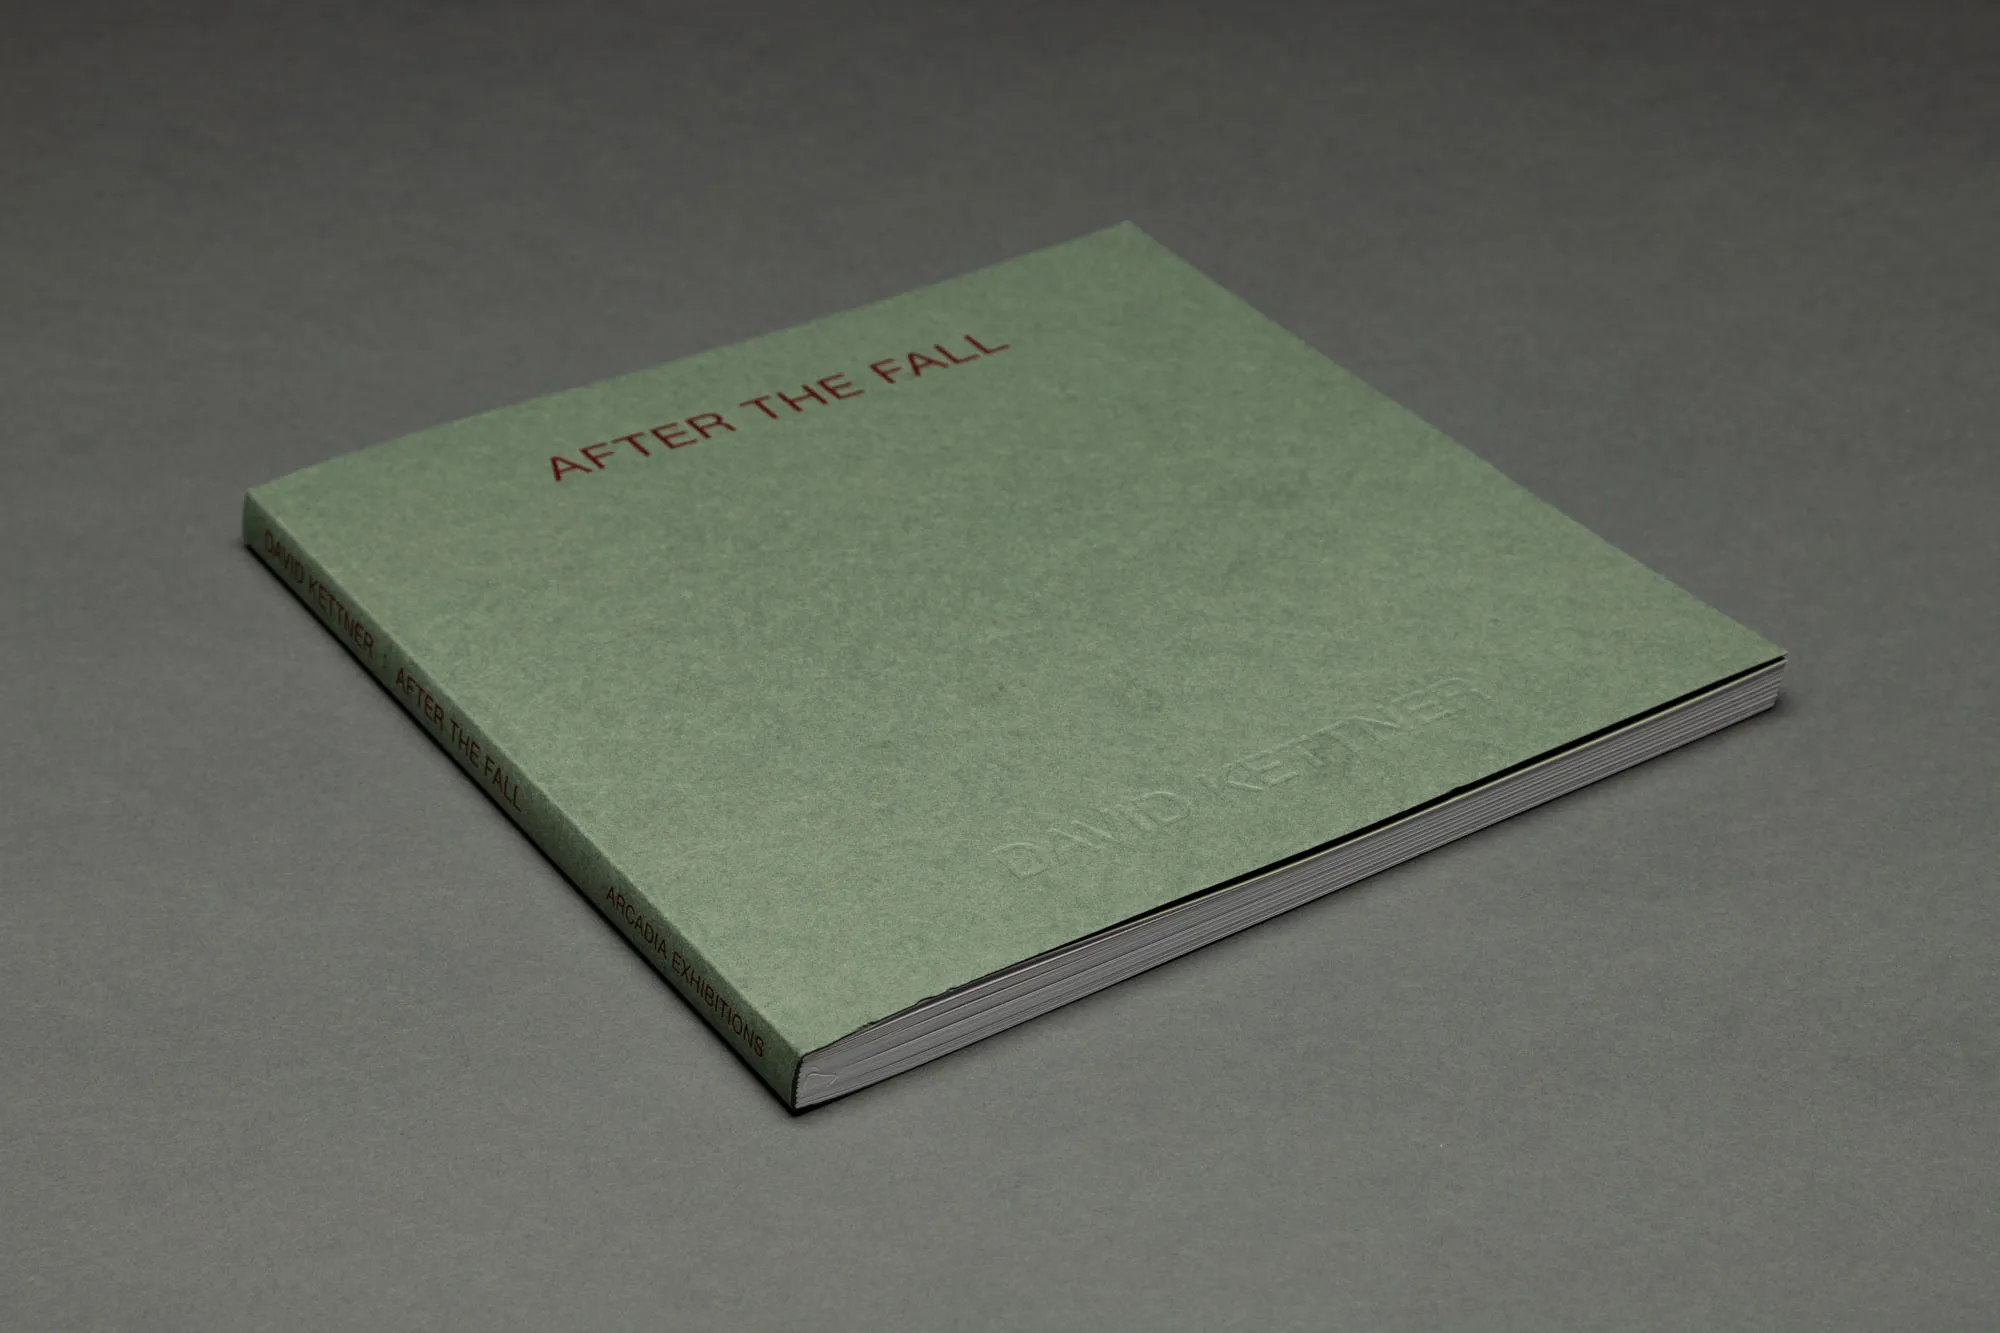 A green covered book entitles AFTER THE FALL.